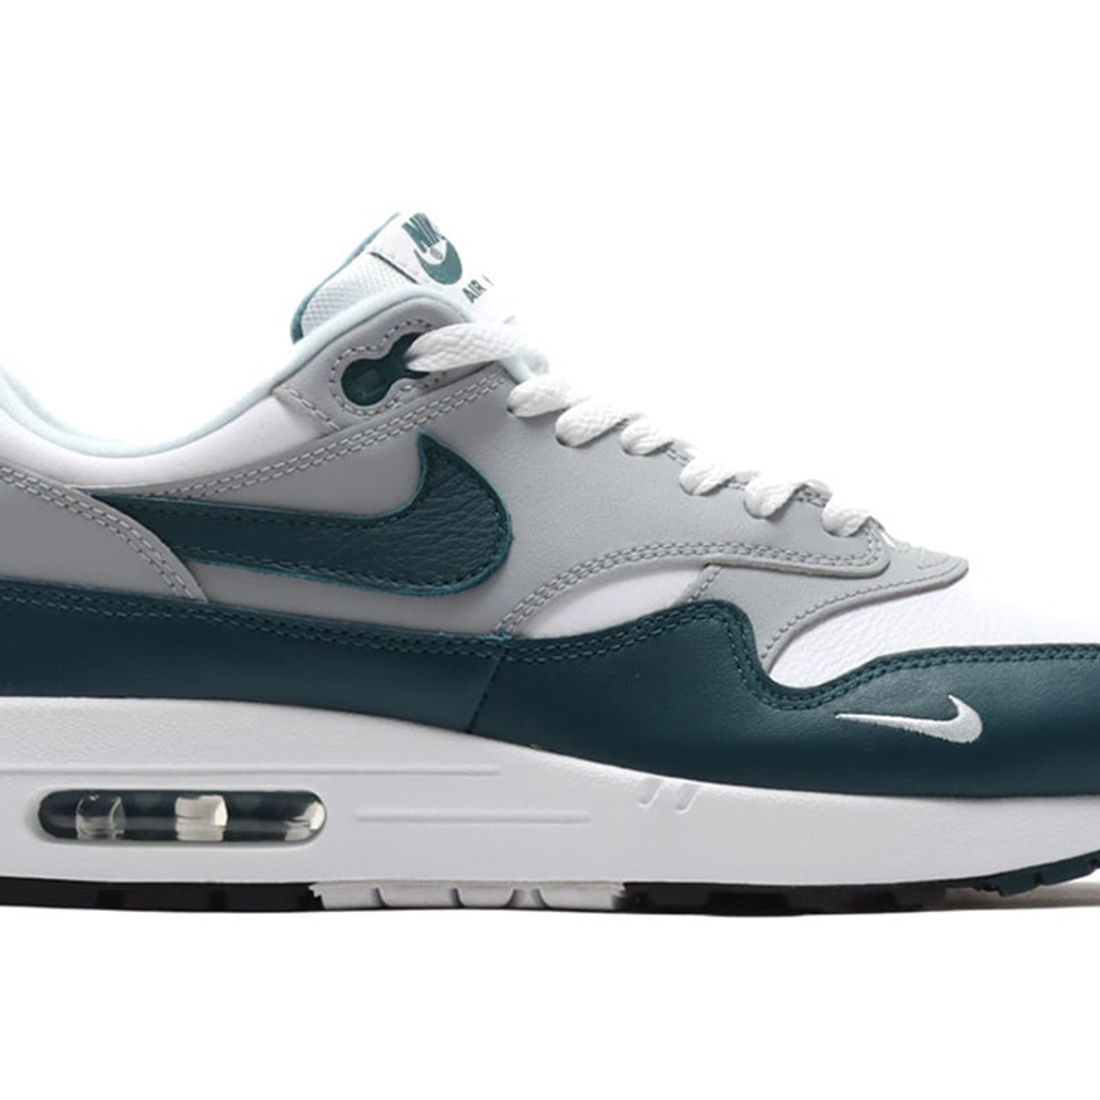 Official Images Surface of the Nike Air Max 1 'Dark Teal Green